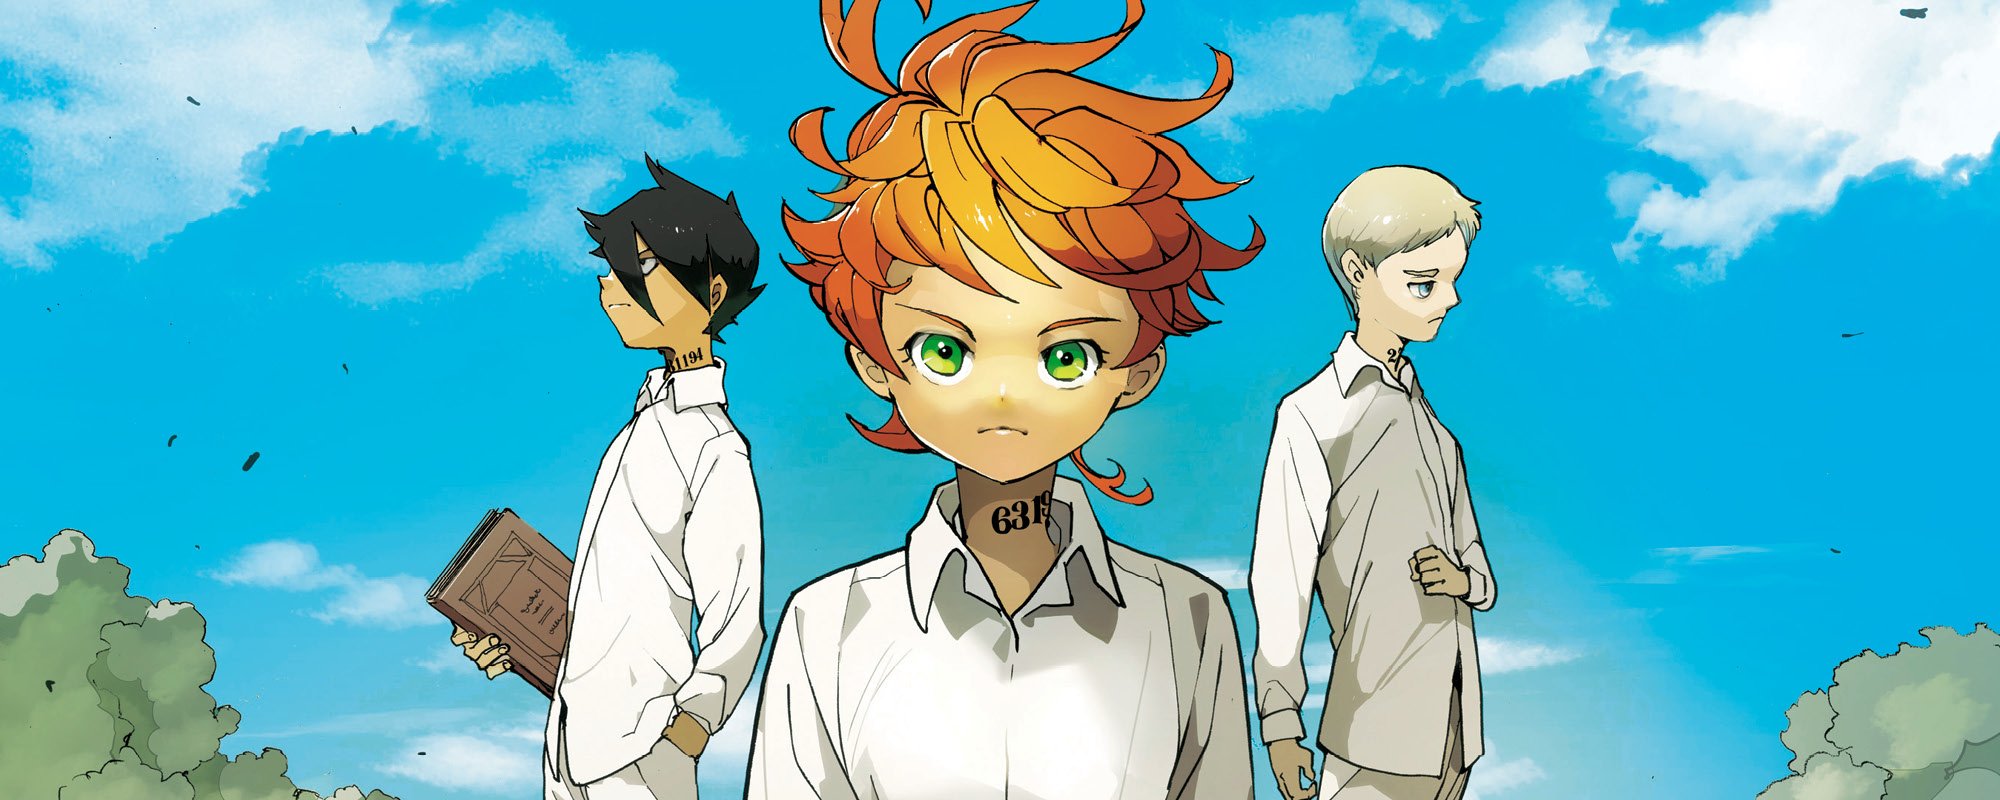 The Promised Neverland Anime Announced & Confirmed for NoitaminA in 2019 •  Anime UK News